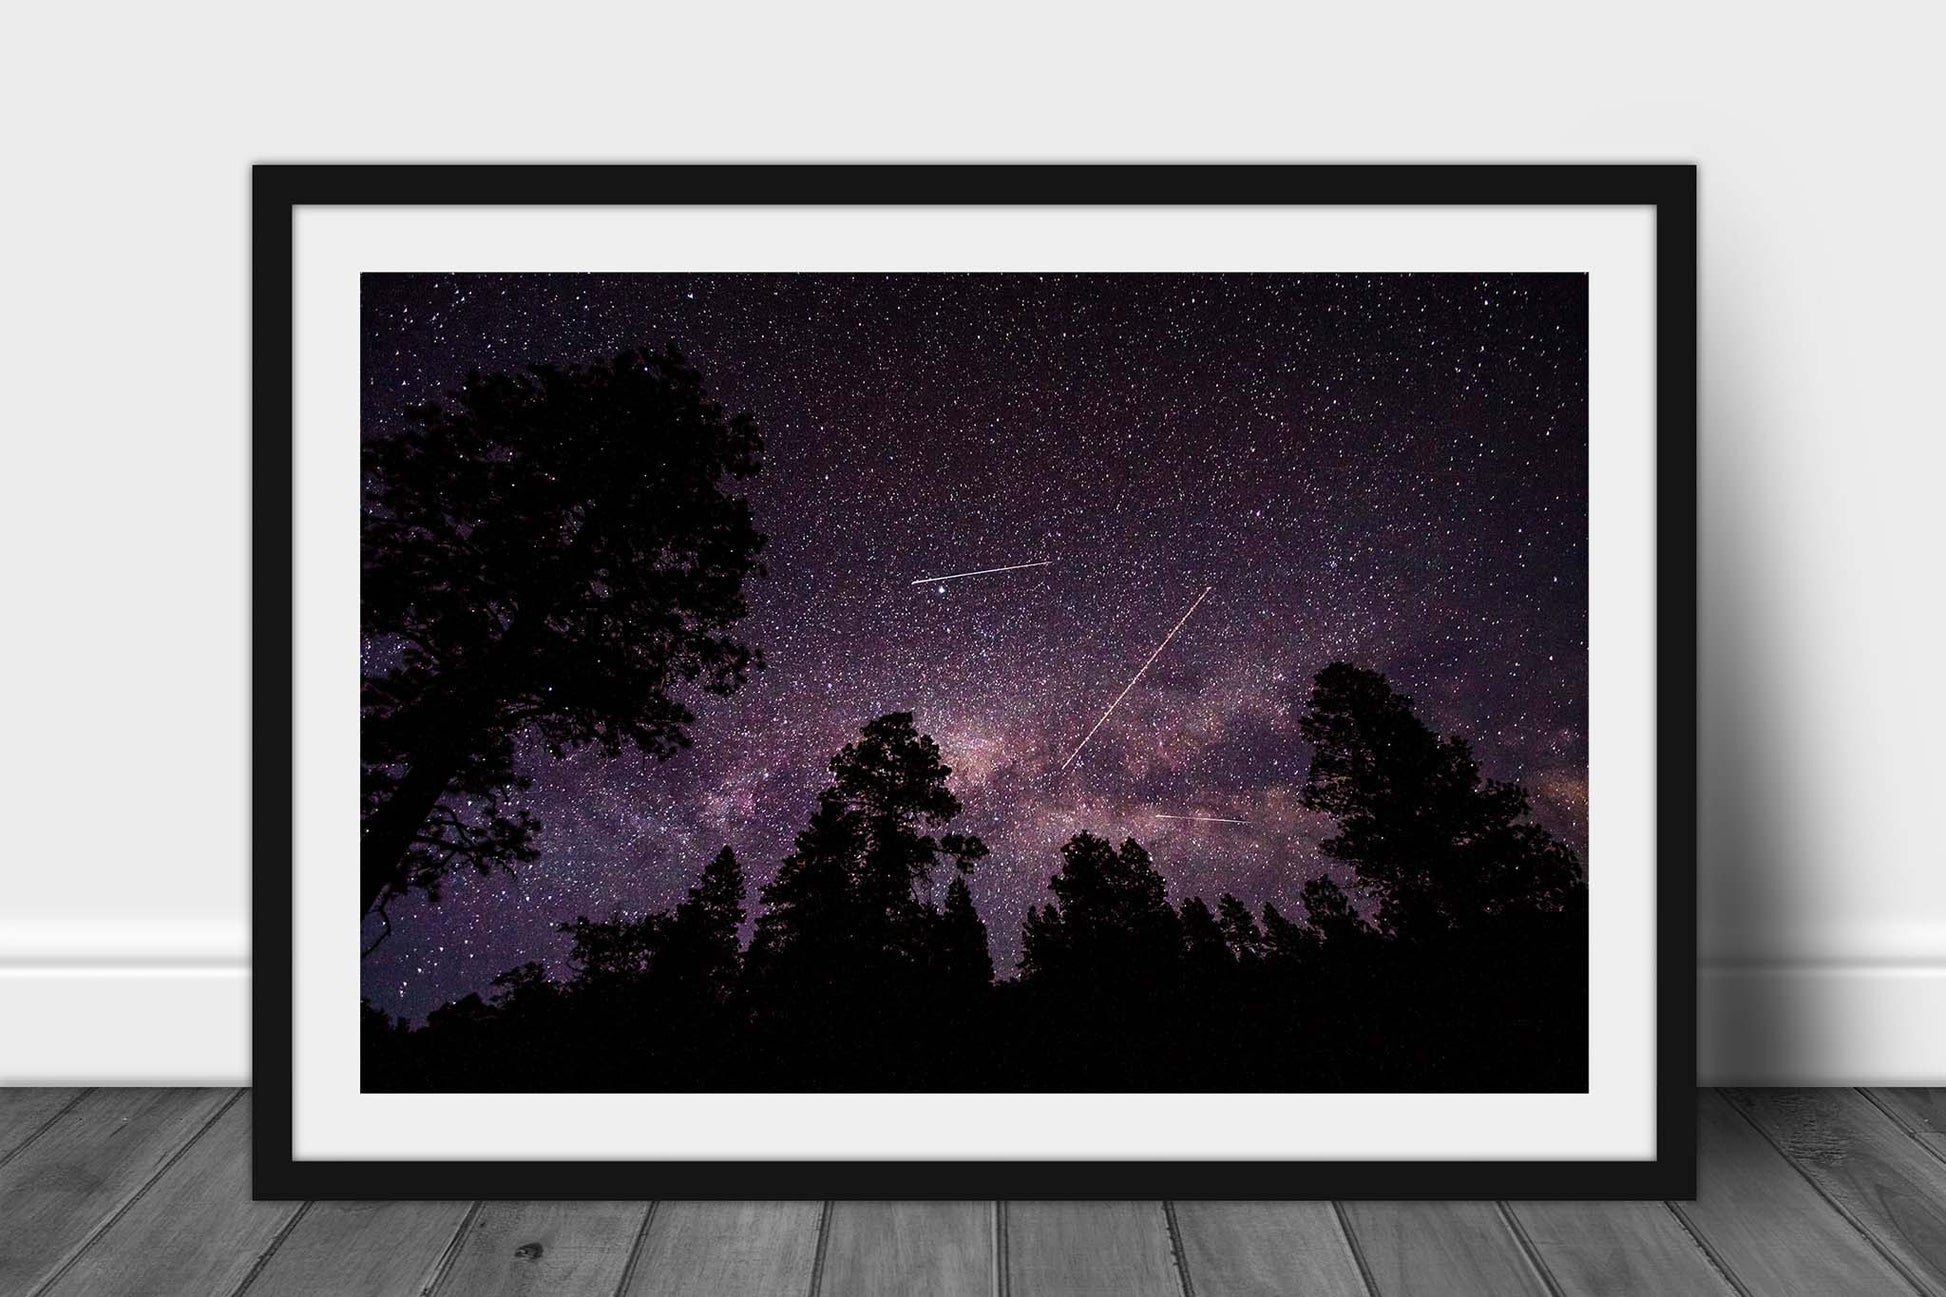 Framed celestial photography print of shooting stars, satellites and planes in the night sky above pine tree silhouettes on a starry night in the Colorado Rocky Mountains by Sean Ramsey of Southern Plains Photography.